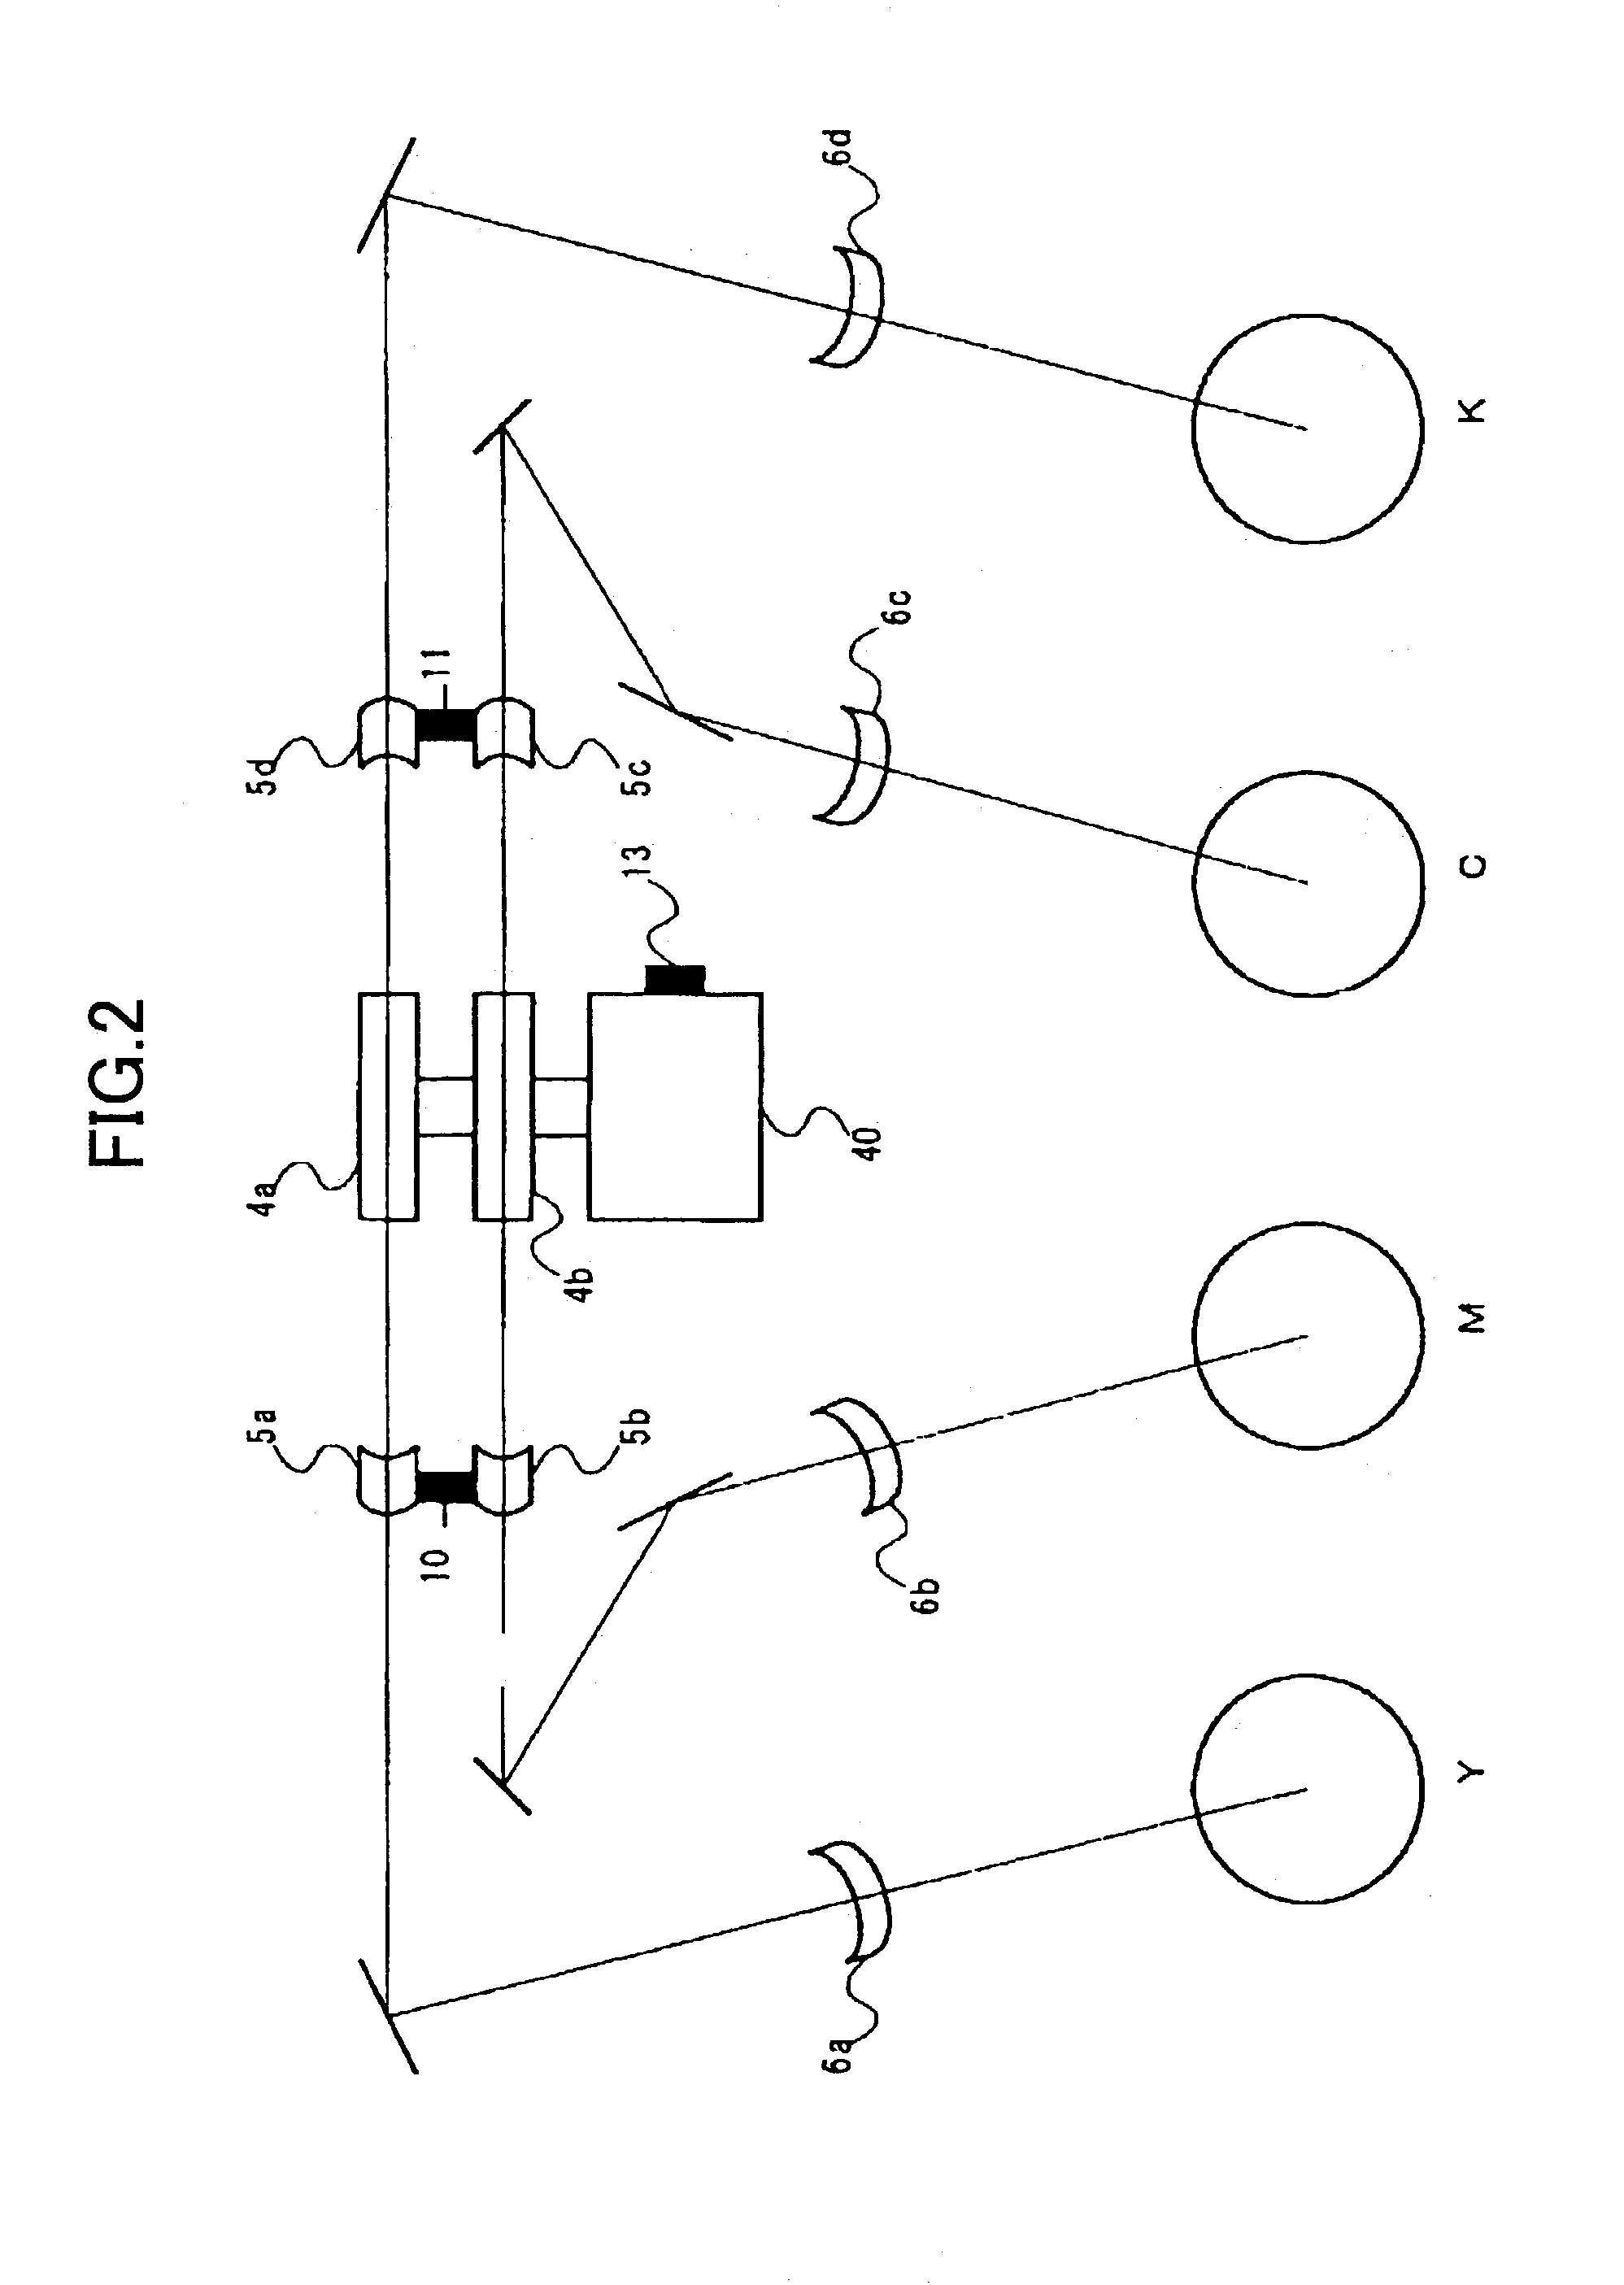 Image forming method, image forming apparatus, optical scan device, and image forming apparatus using the same